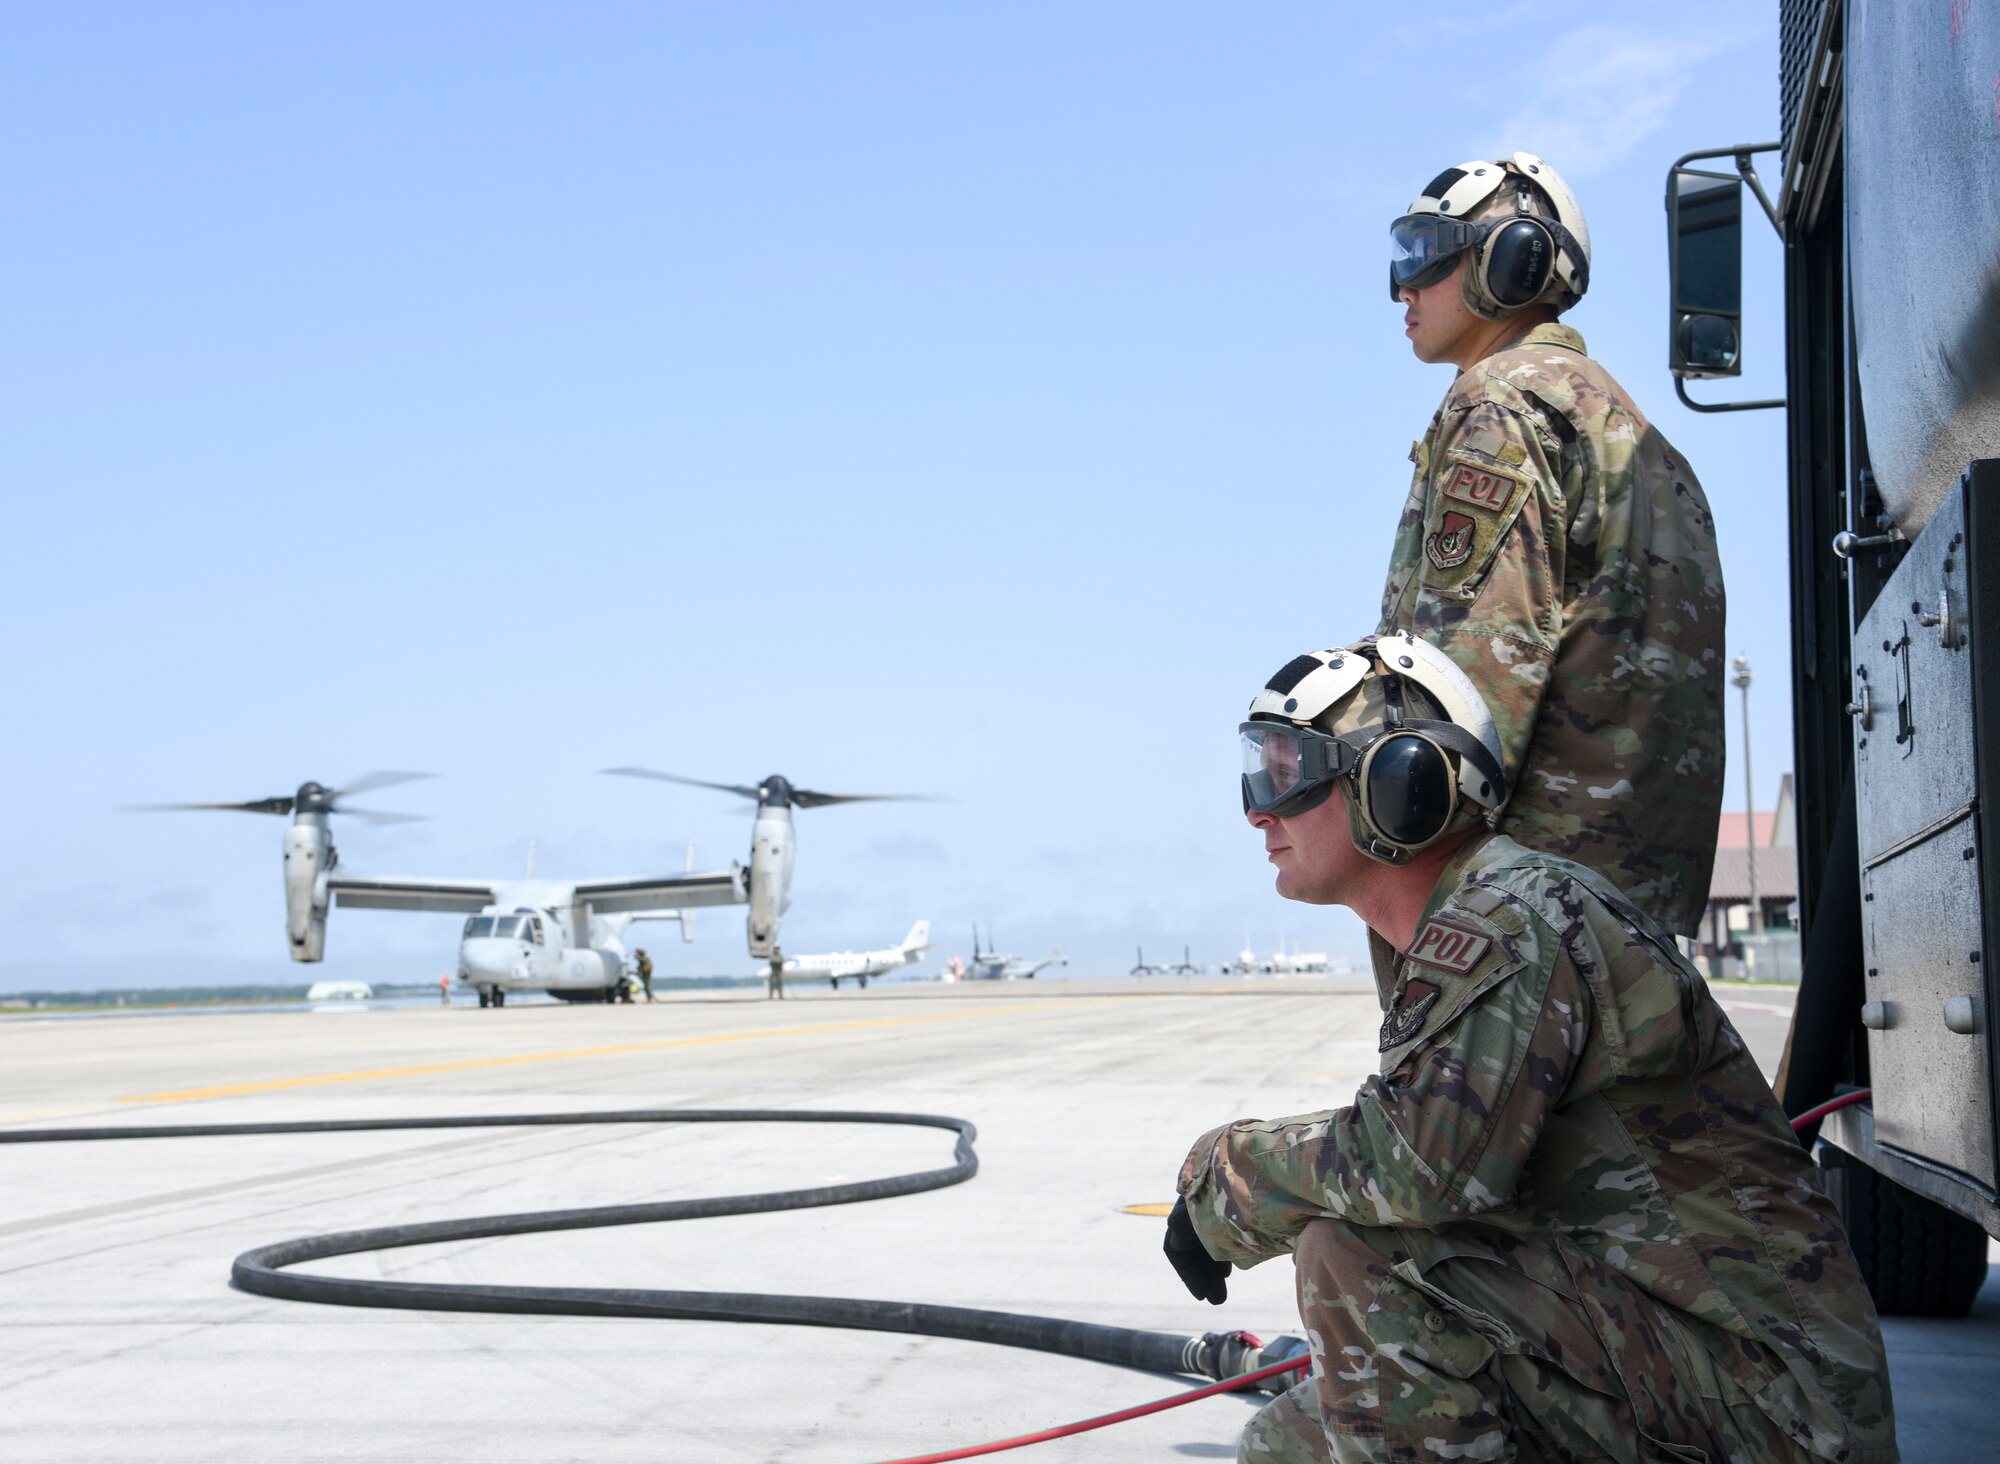 Two Airmen wait next to a truck while a tiltrotor aircraft is parked in the background.